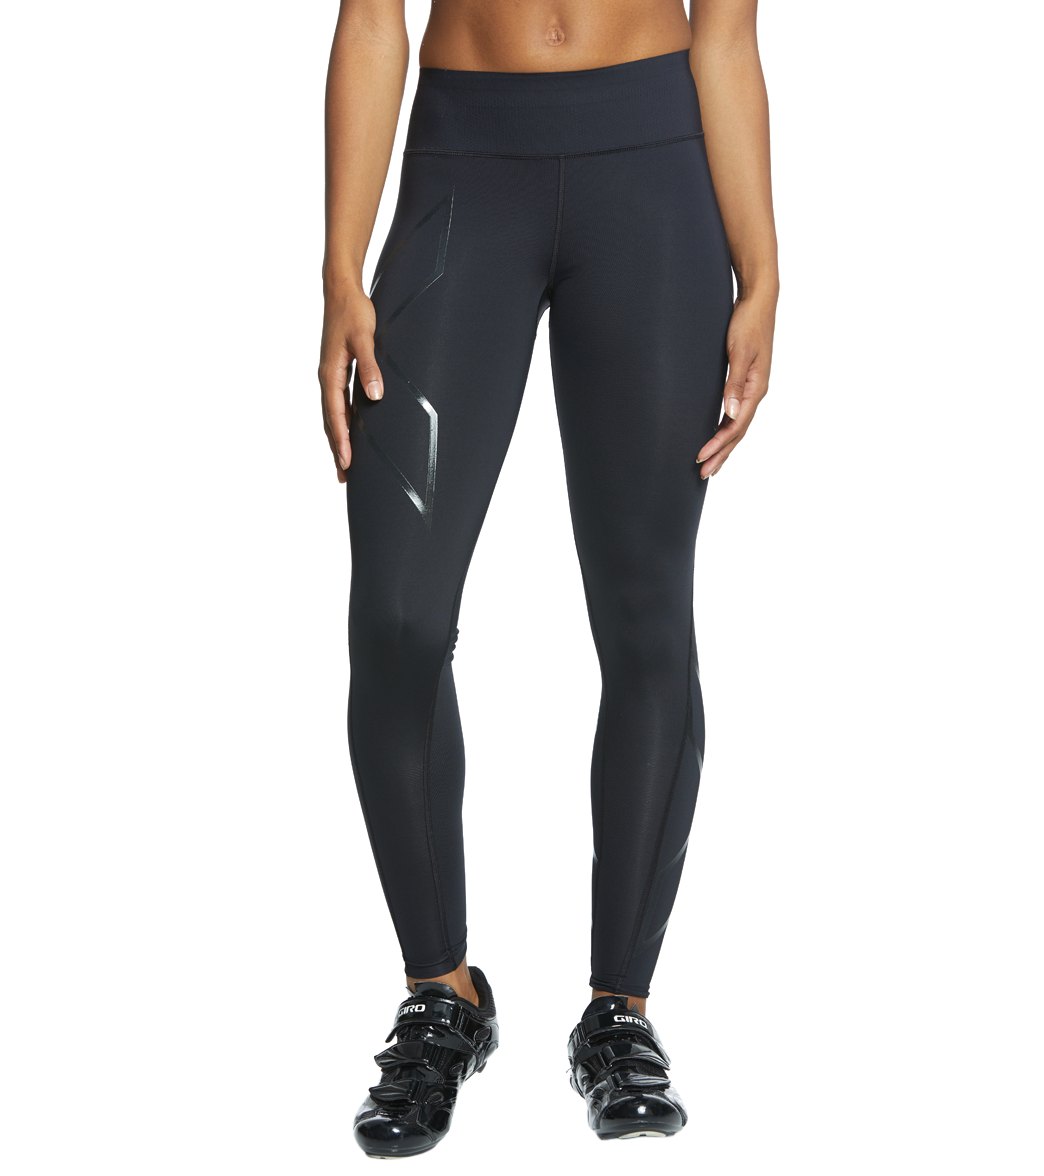 2XU Women's Bonded Mid-Rise Tights at